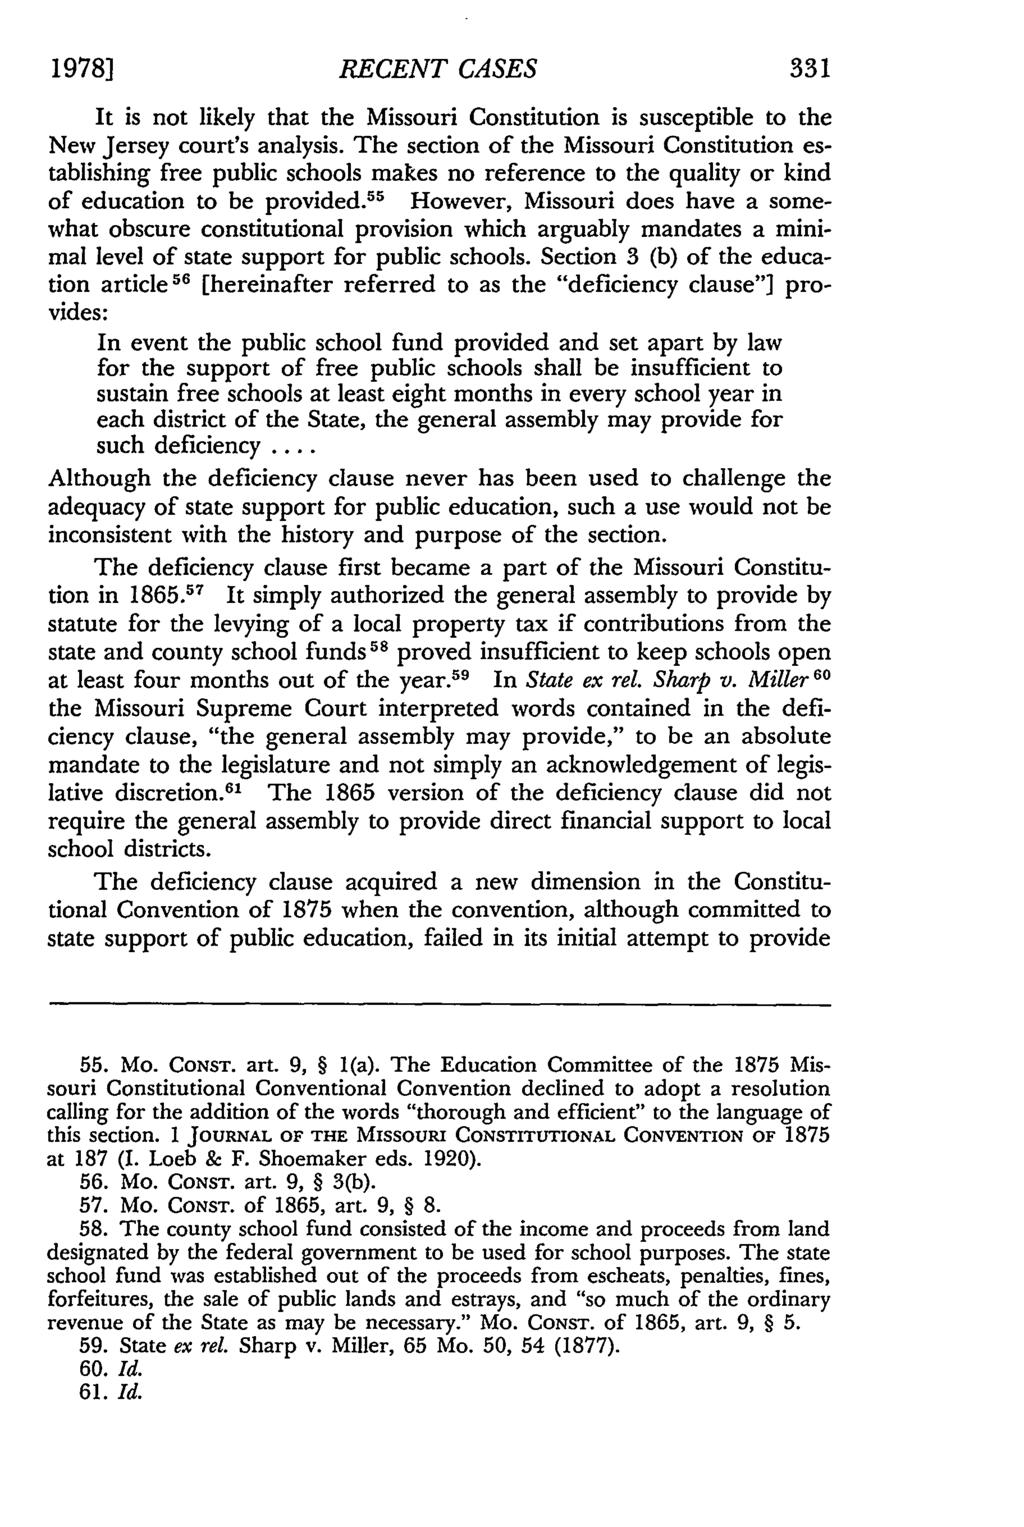 1978] Missouri RECENT Law Review, CASES Vol. 43, Iss. 2 [1978], Art. 7 It is not likely that the Missouri Constitution is susceptible to the New Jersey court's analysis.